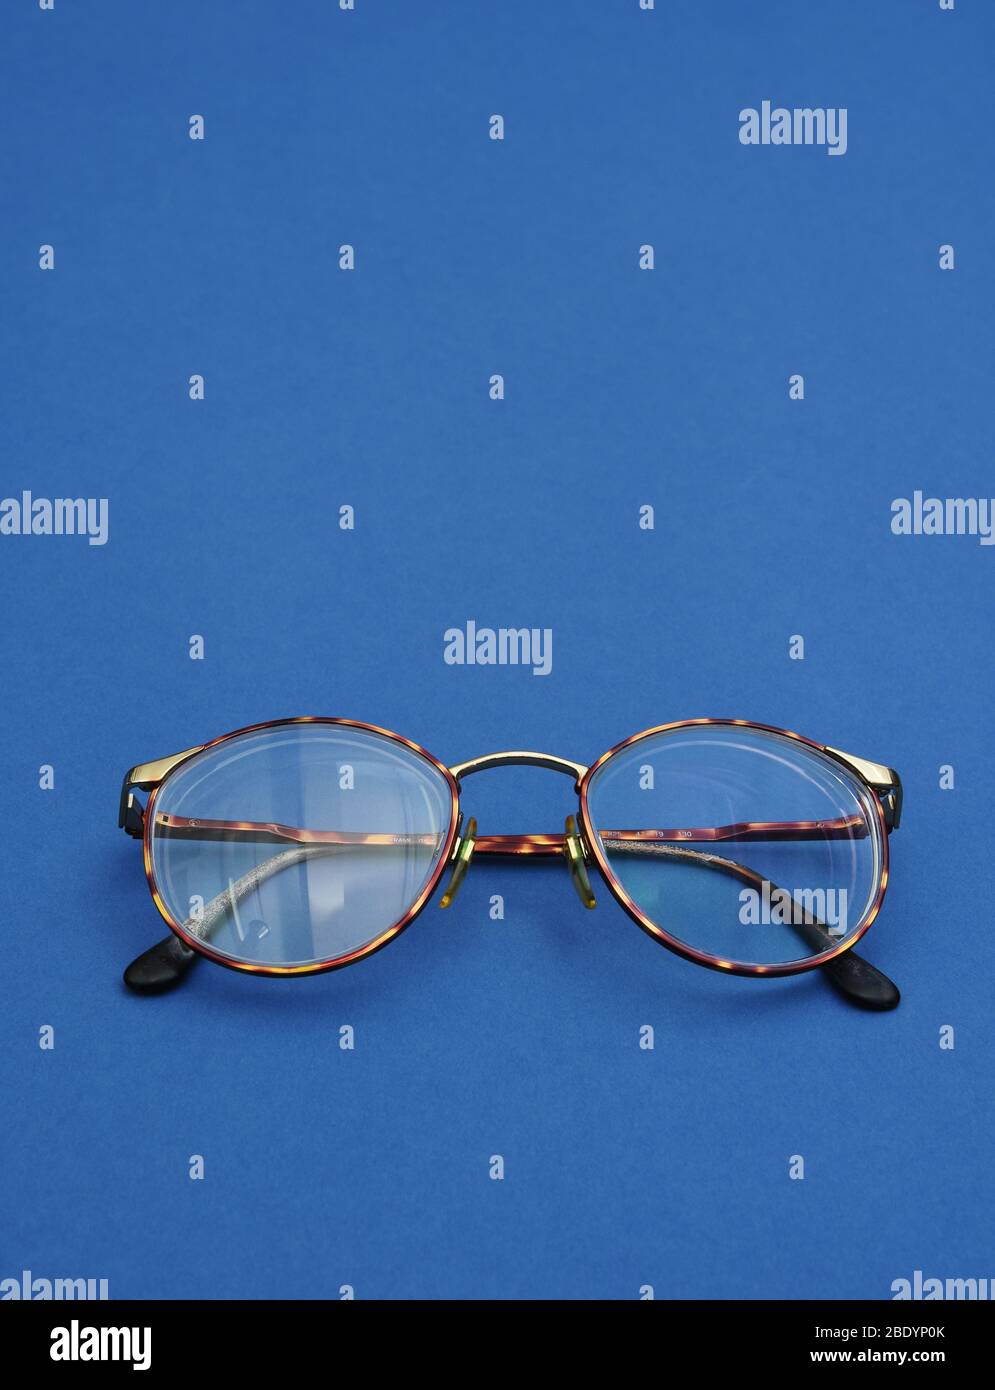 Glasses with reflective and non-reflective lenses Stock Photo